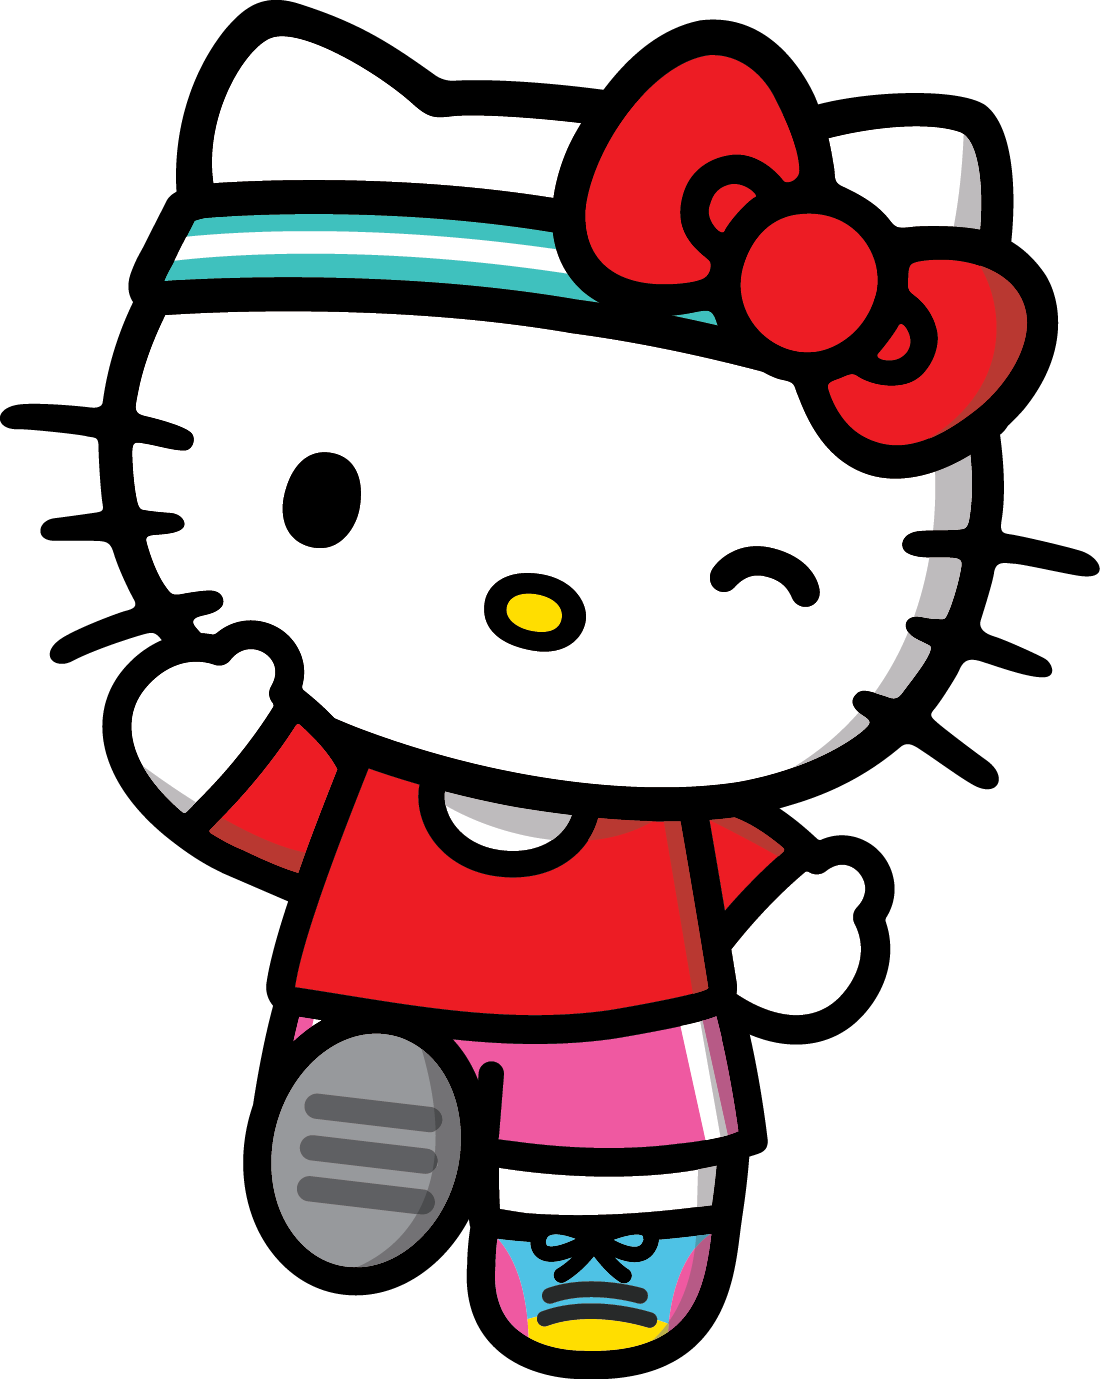 Image result for hello. Valentine clipart kitty